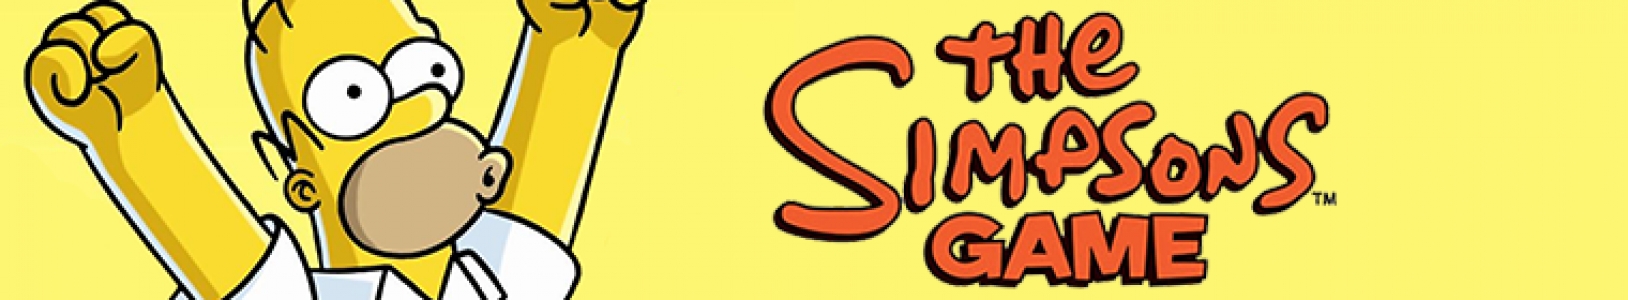 The Simpsons Game banner